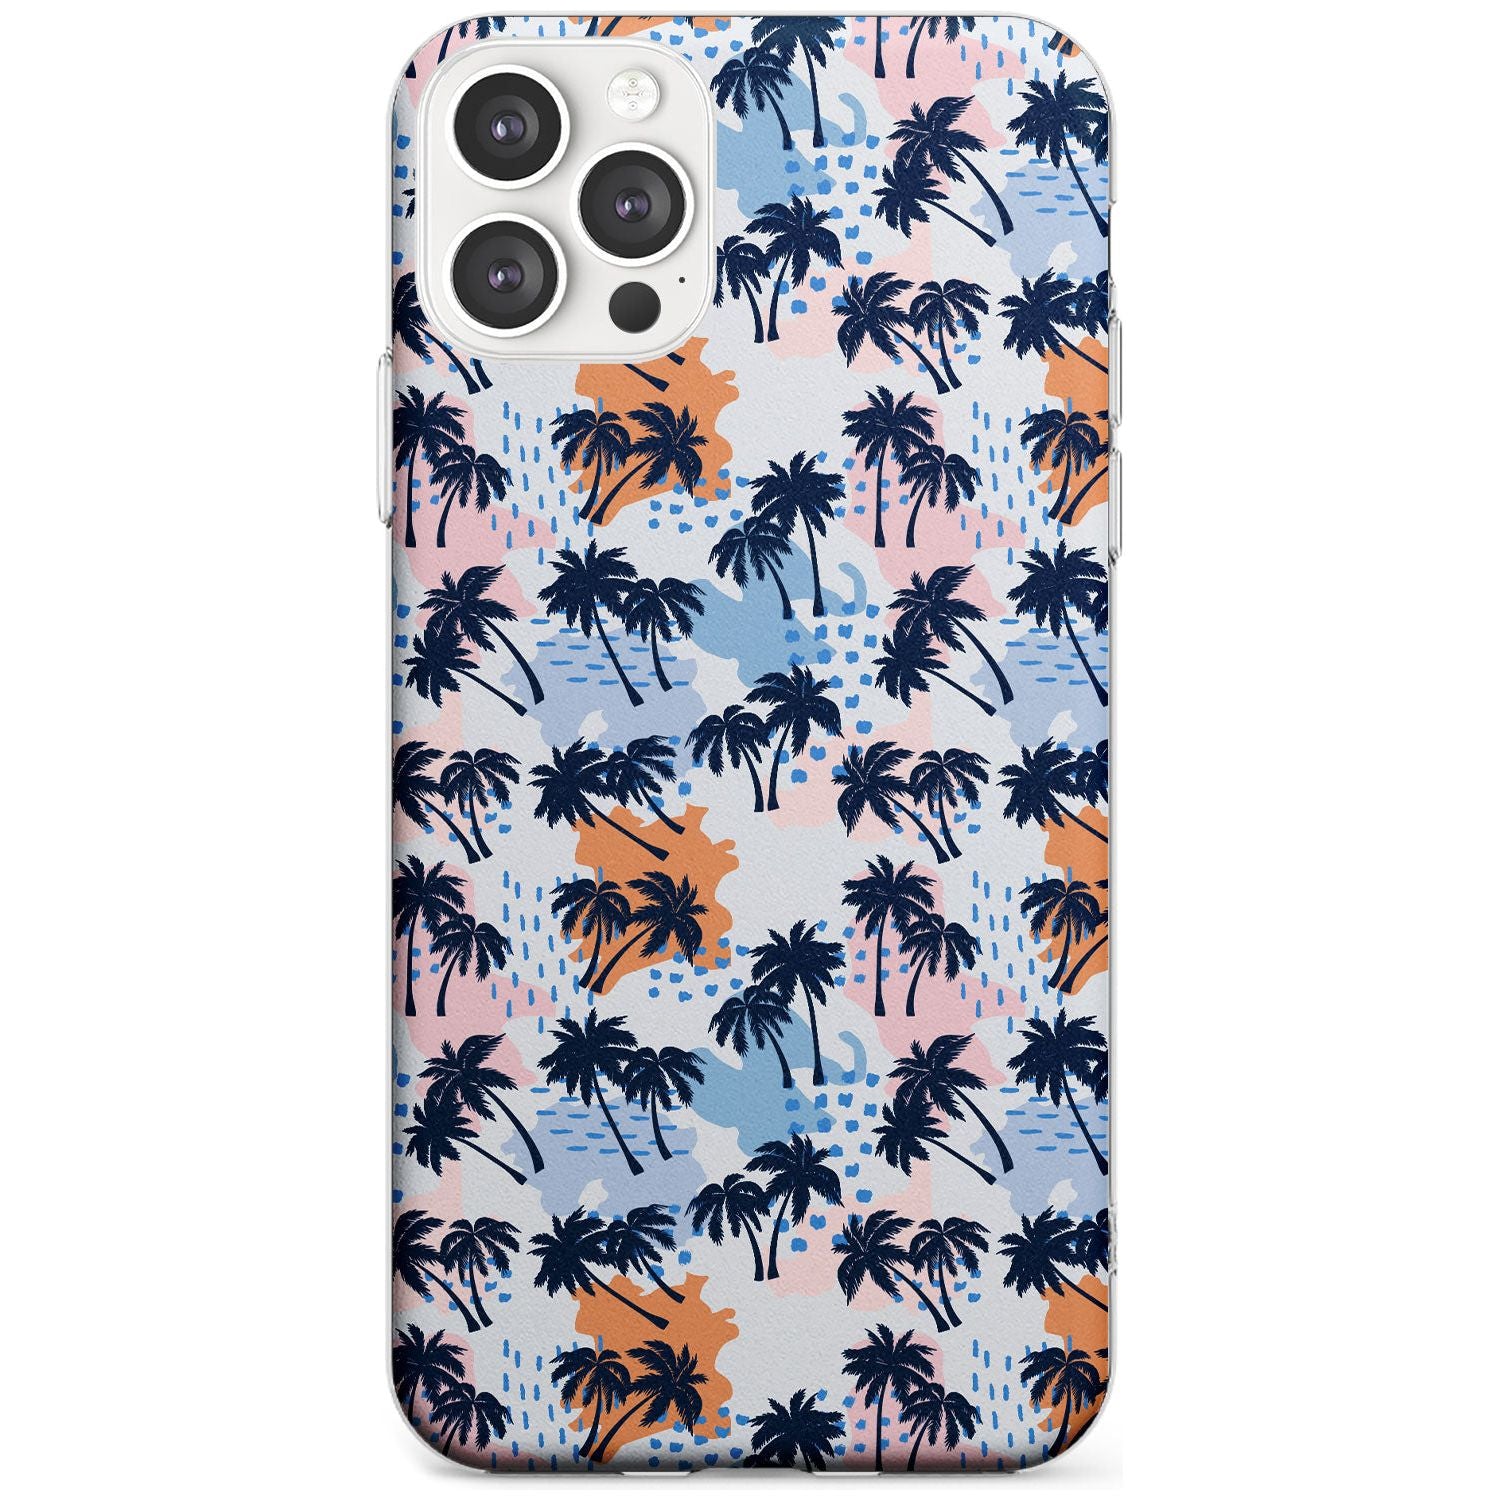 Summer Palm Trees Black Impact Phone Case for iPhone 11 Pro Max